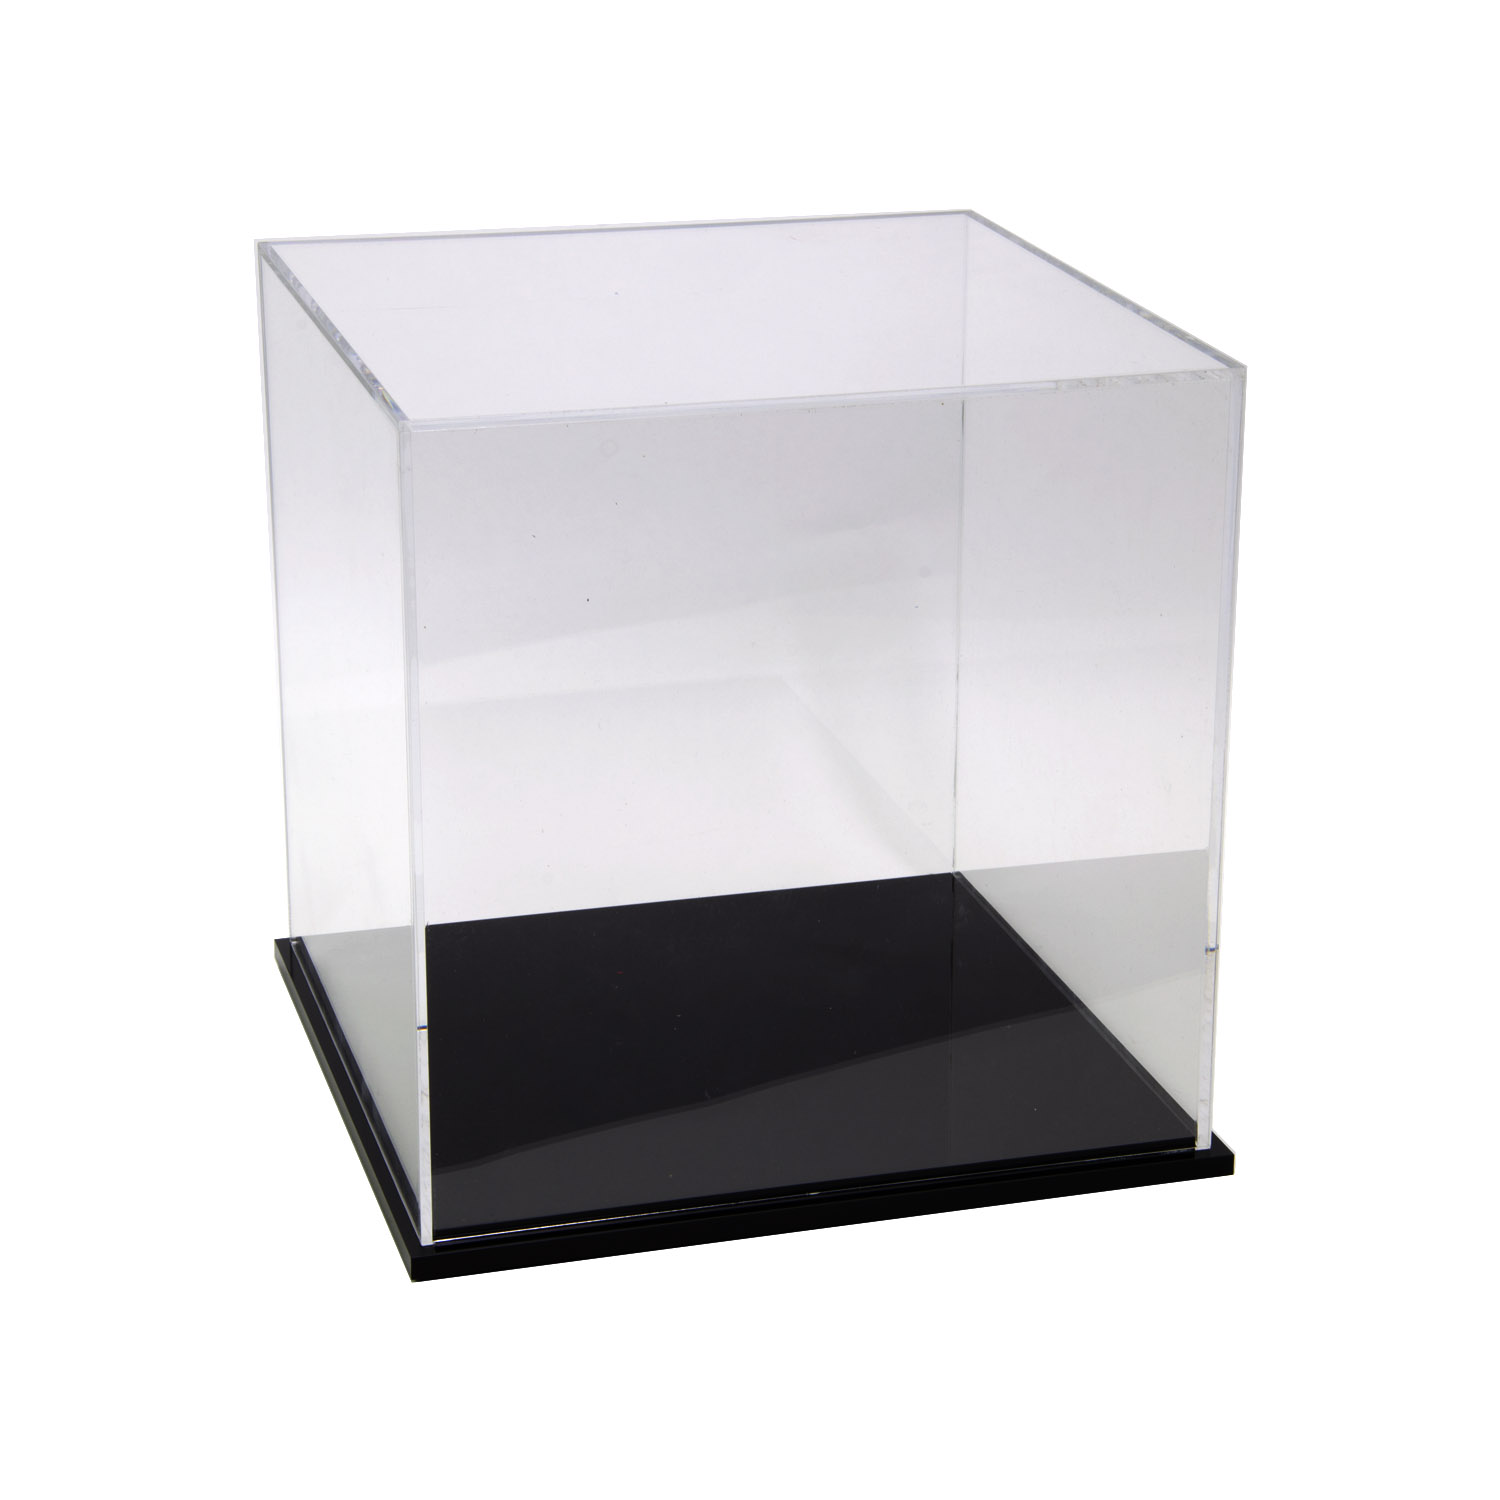 5 Sided Cube 14" x 14" x 14" Display Stand Pedestal Box Cover Riser in White 